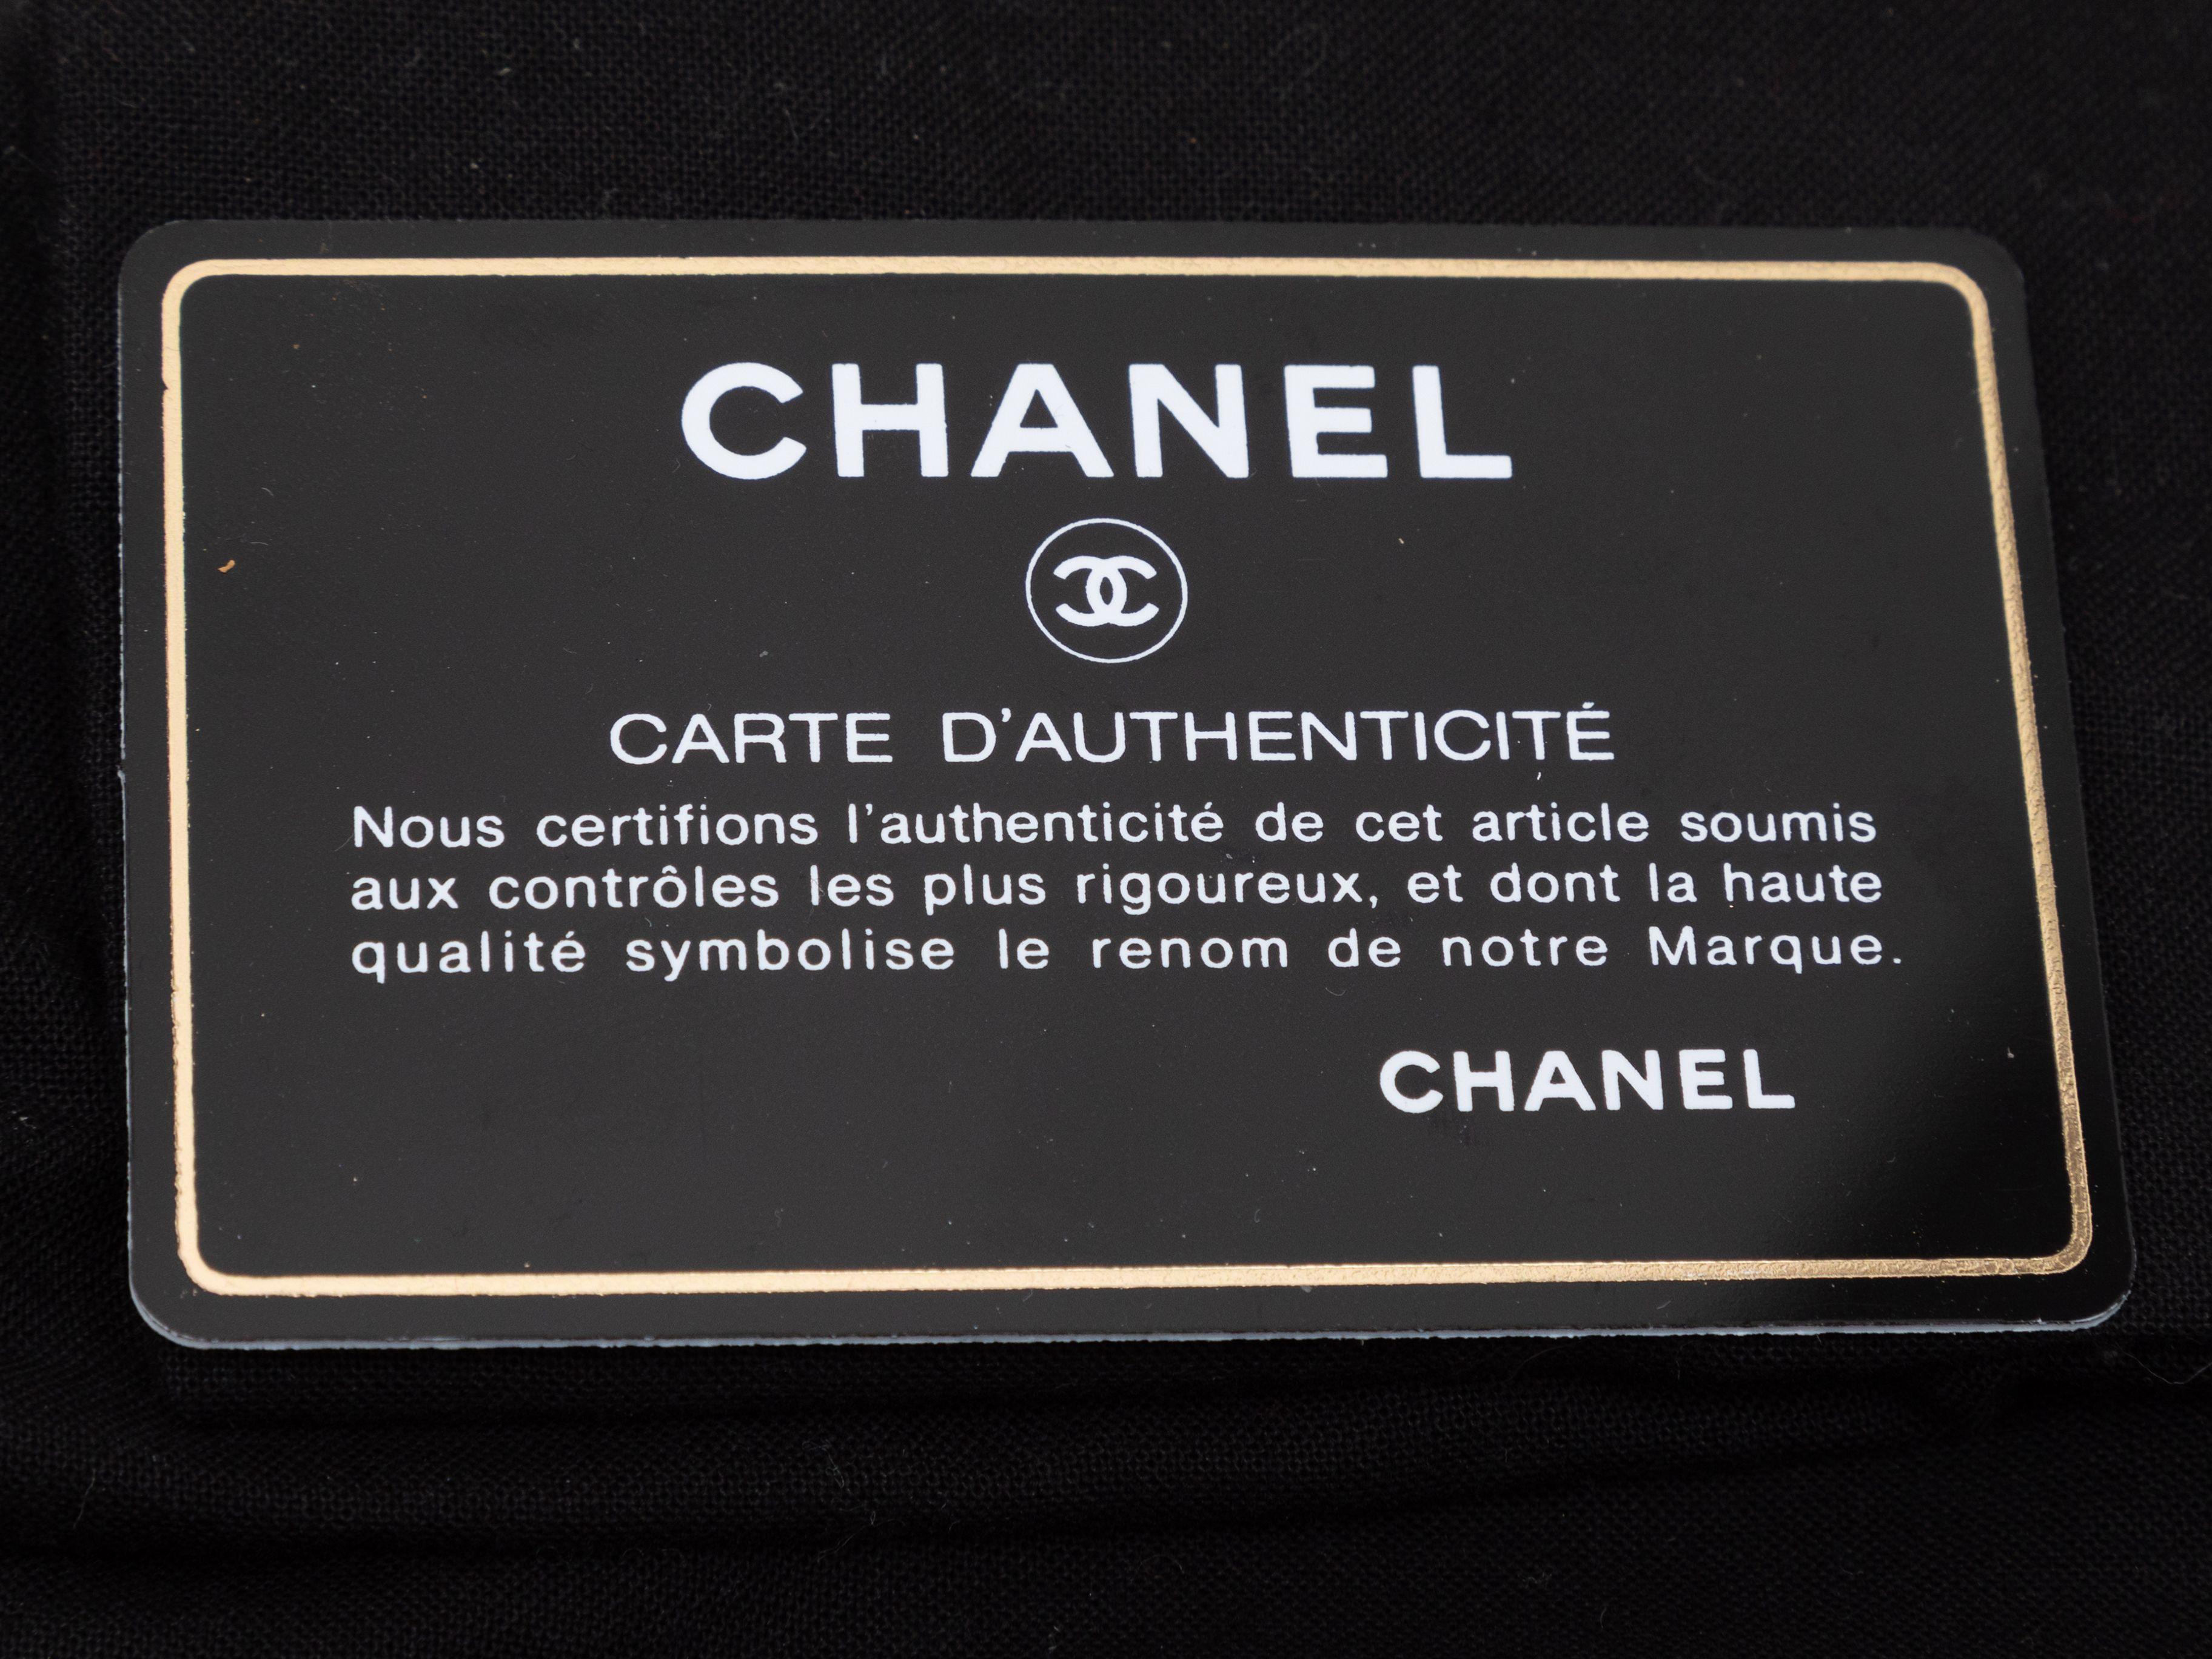 Product Details: Black Chanel 2005 Surpique Lambskin Pochette. This Pochette features a quilted lambskin leather body, silver-tone hardware, contrast stitching throughout, a single chain-link and leather strap, and a top zip closure. 8